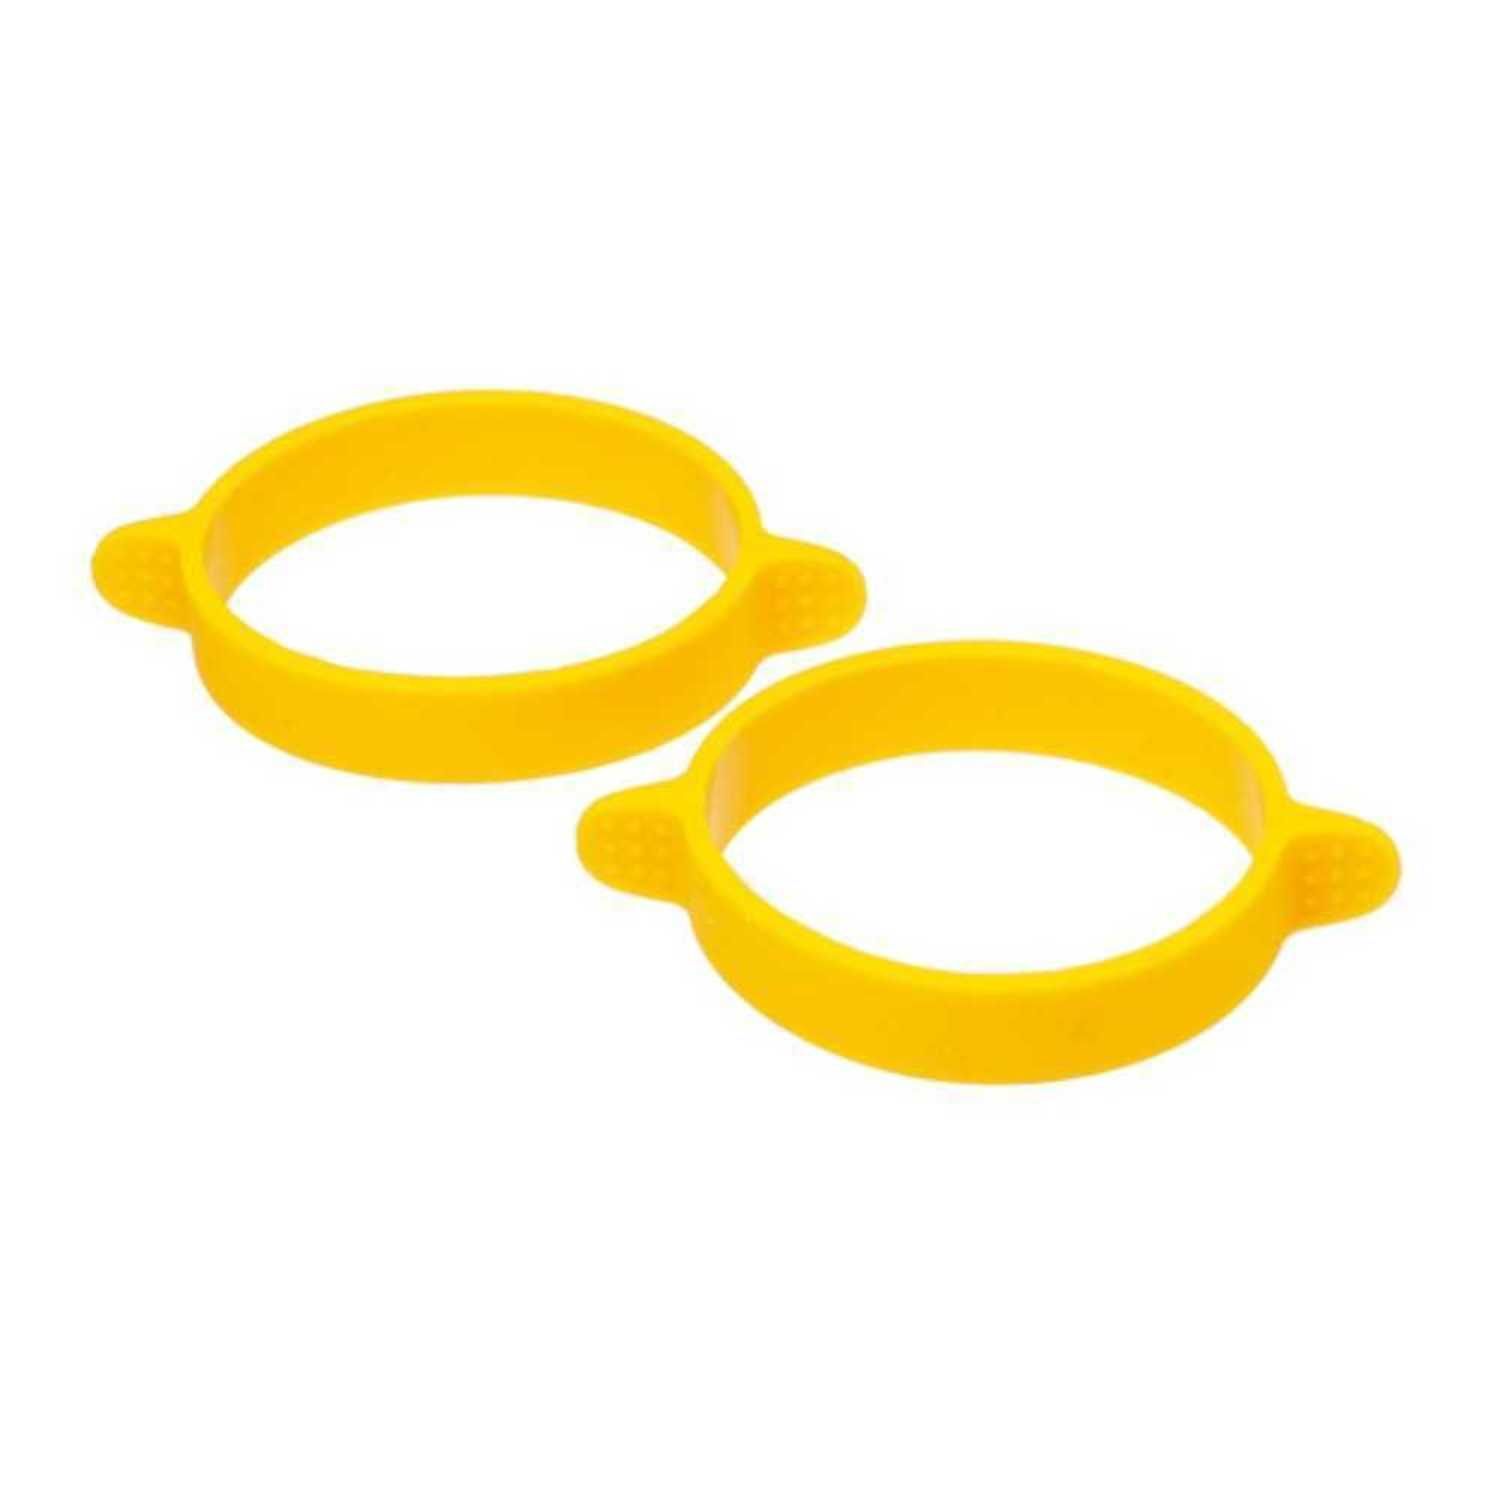 Appetito Yellow Silicone Egg Rings - Set Of 2